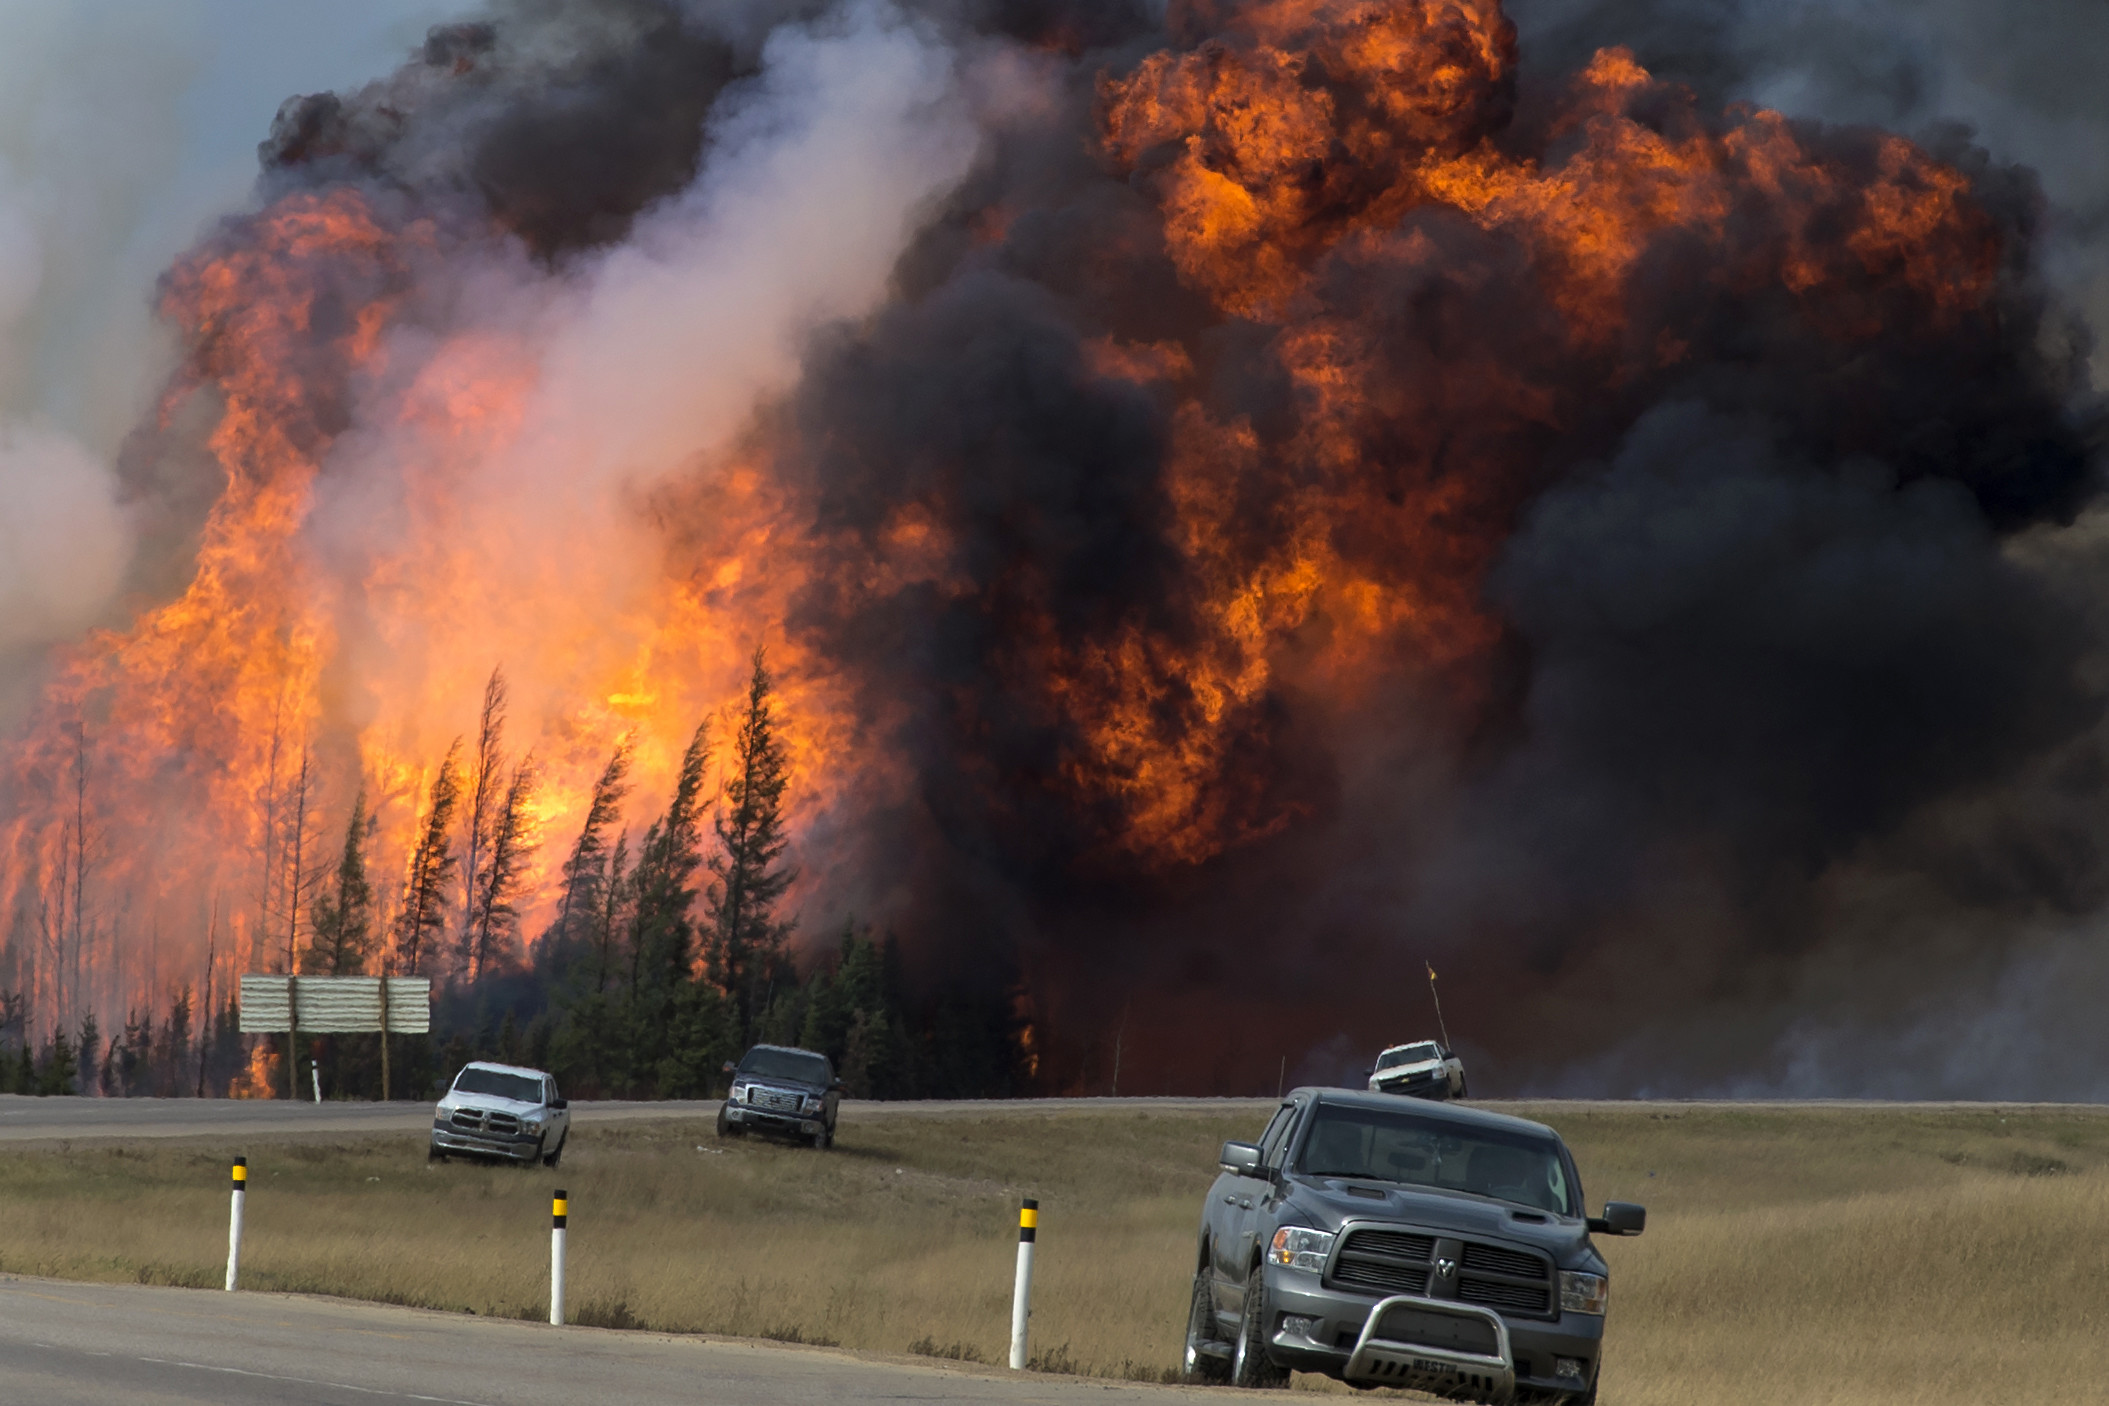 Photo of a large forest fire and cars along a road nearby